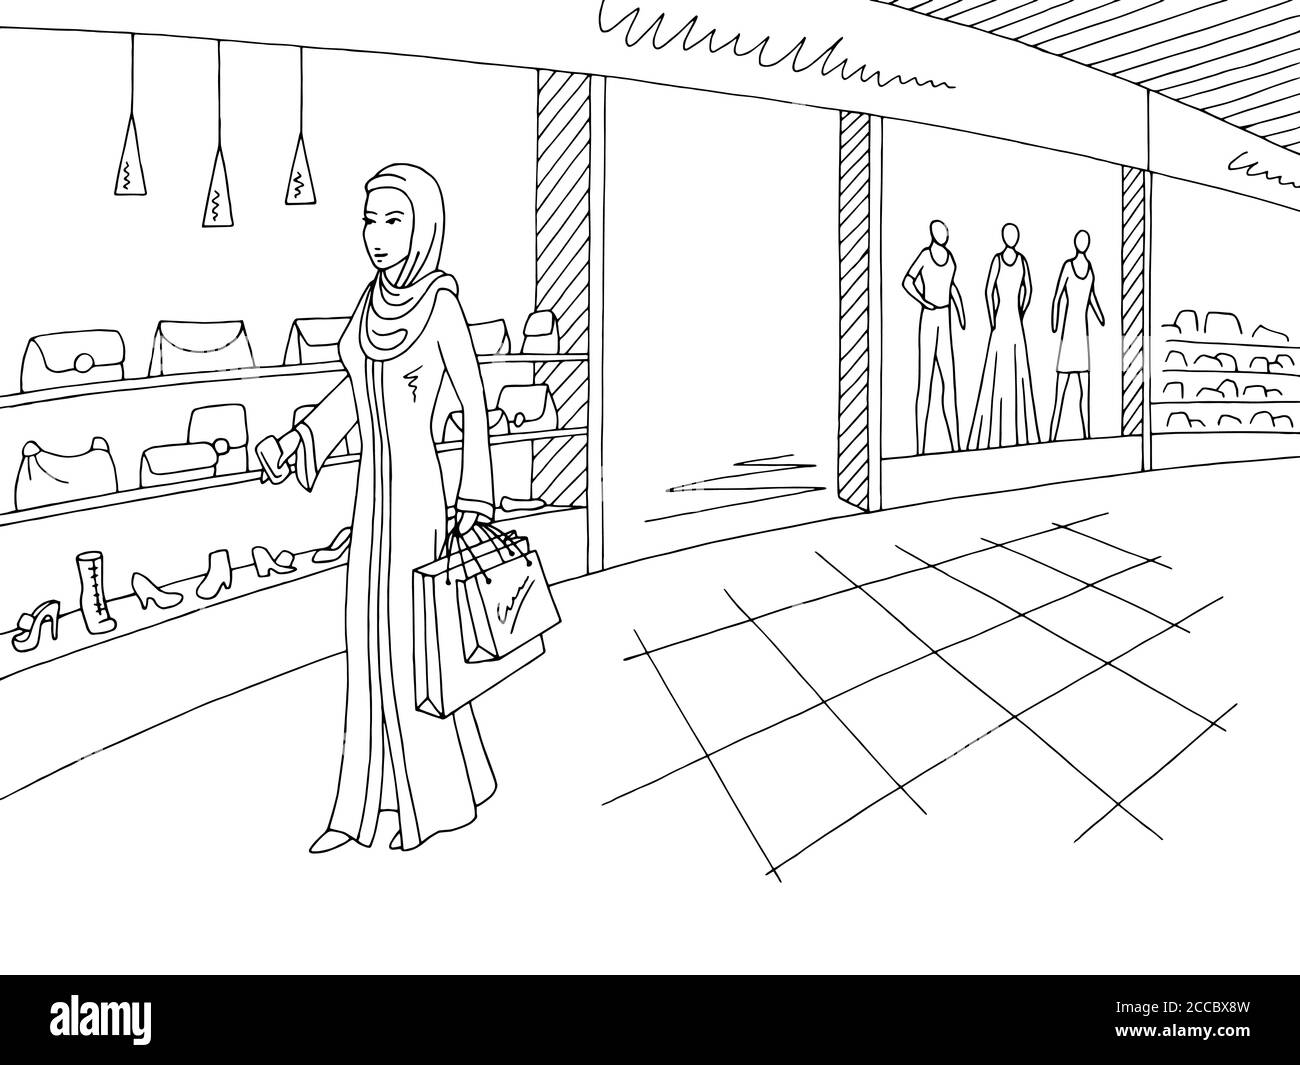 Woman in arab clothing walking in shopping mall graphic black white interior sketch illustration vector Stock Vector